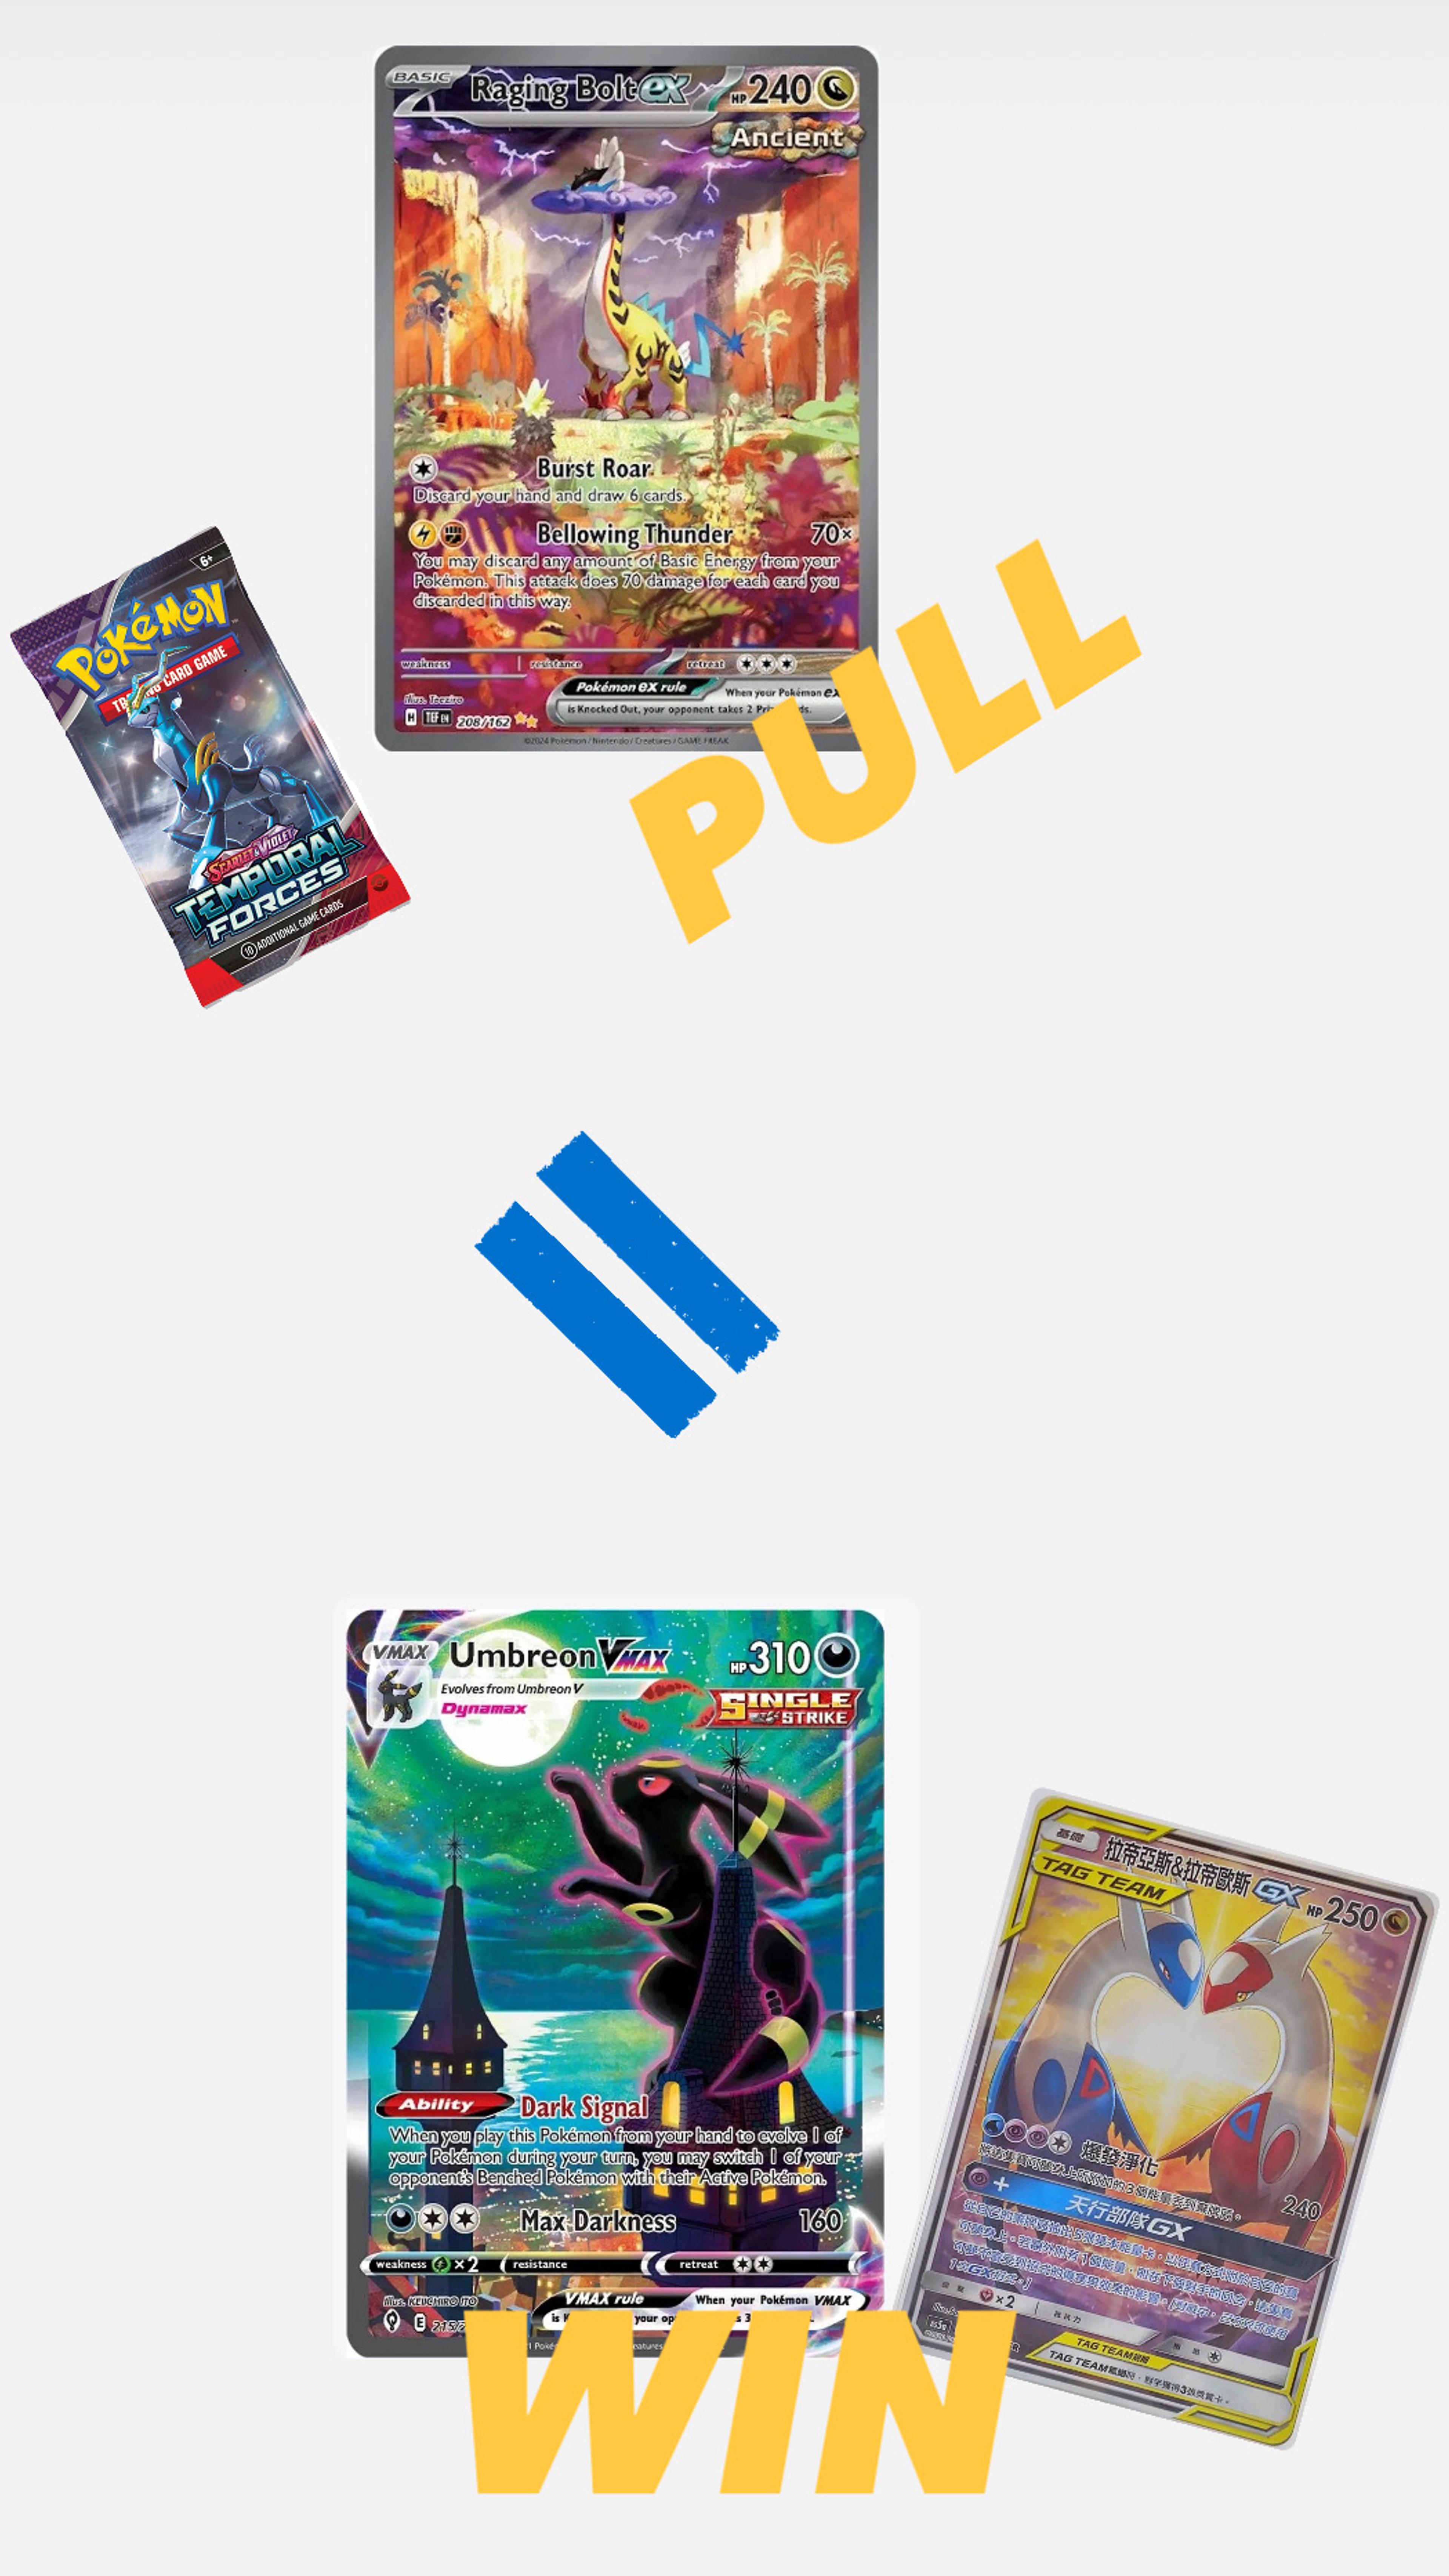 Preview image for the show titled "Craftii: WIN UMBREON VMAX ALT! TCG & MORE!" at May 2, 2024